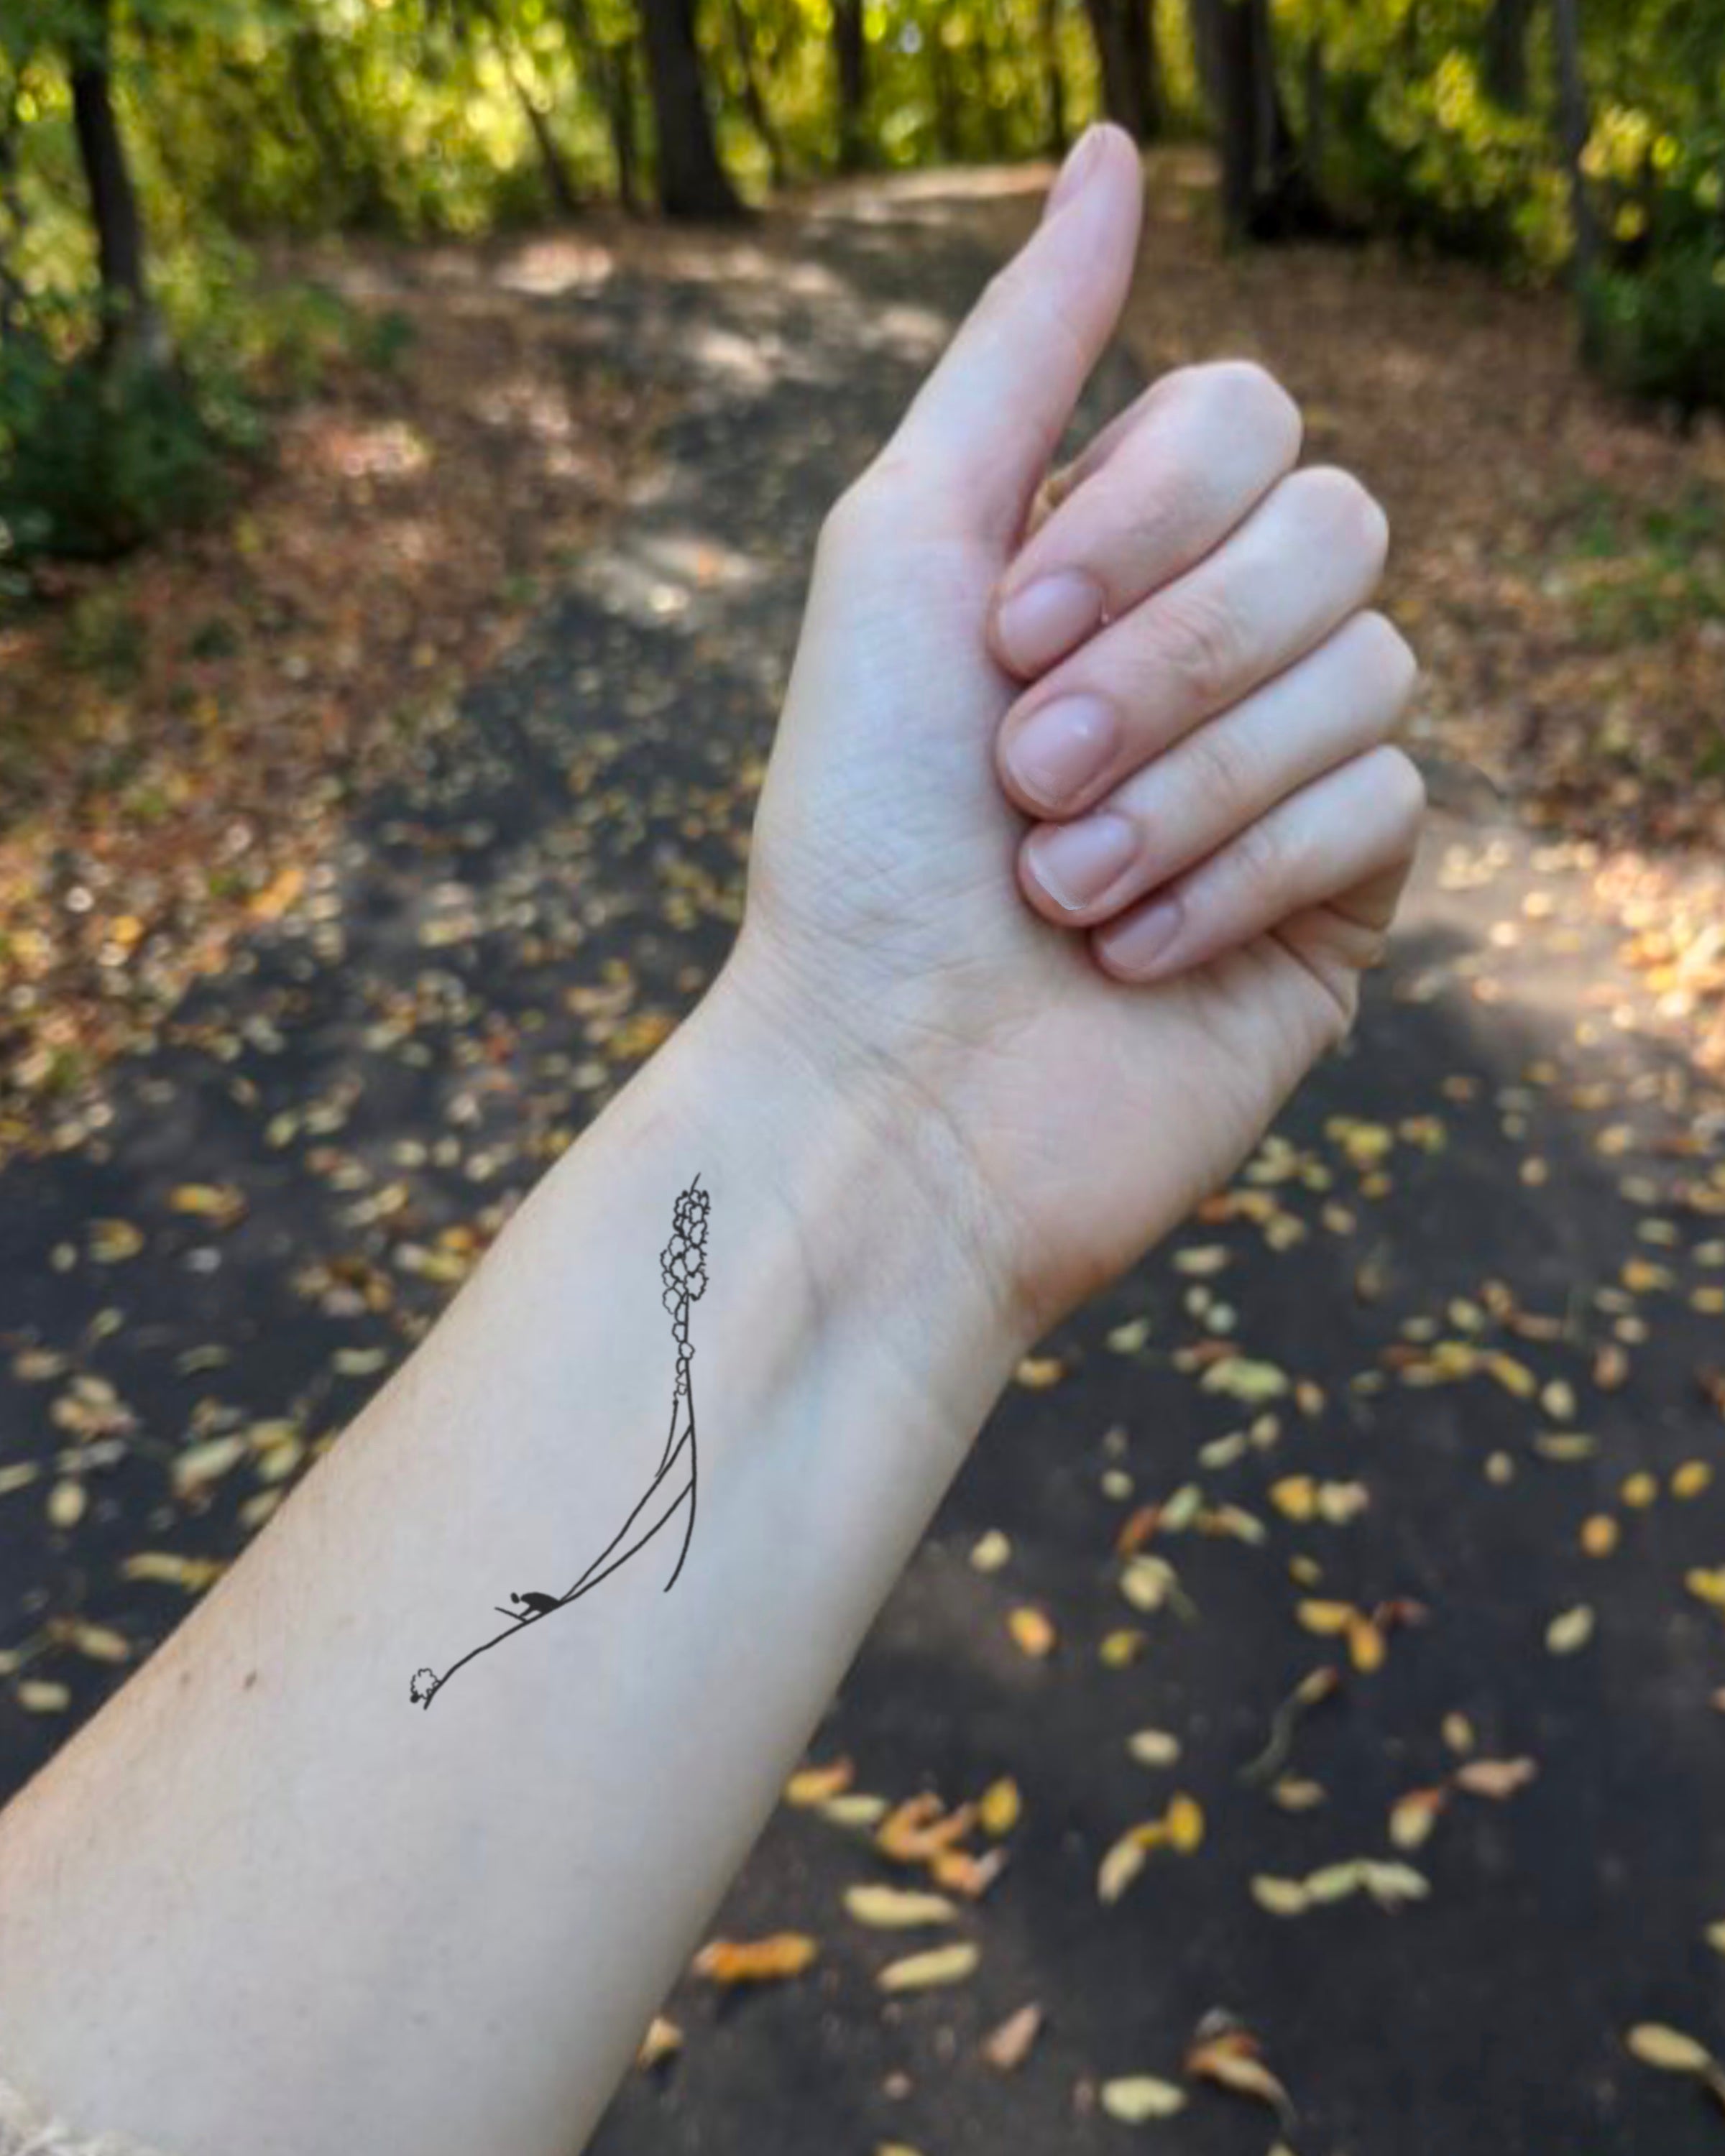 88 Reasons Why Every Woman Should Get A Tattoo in 2018  TattooBlend